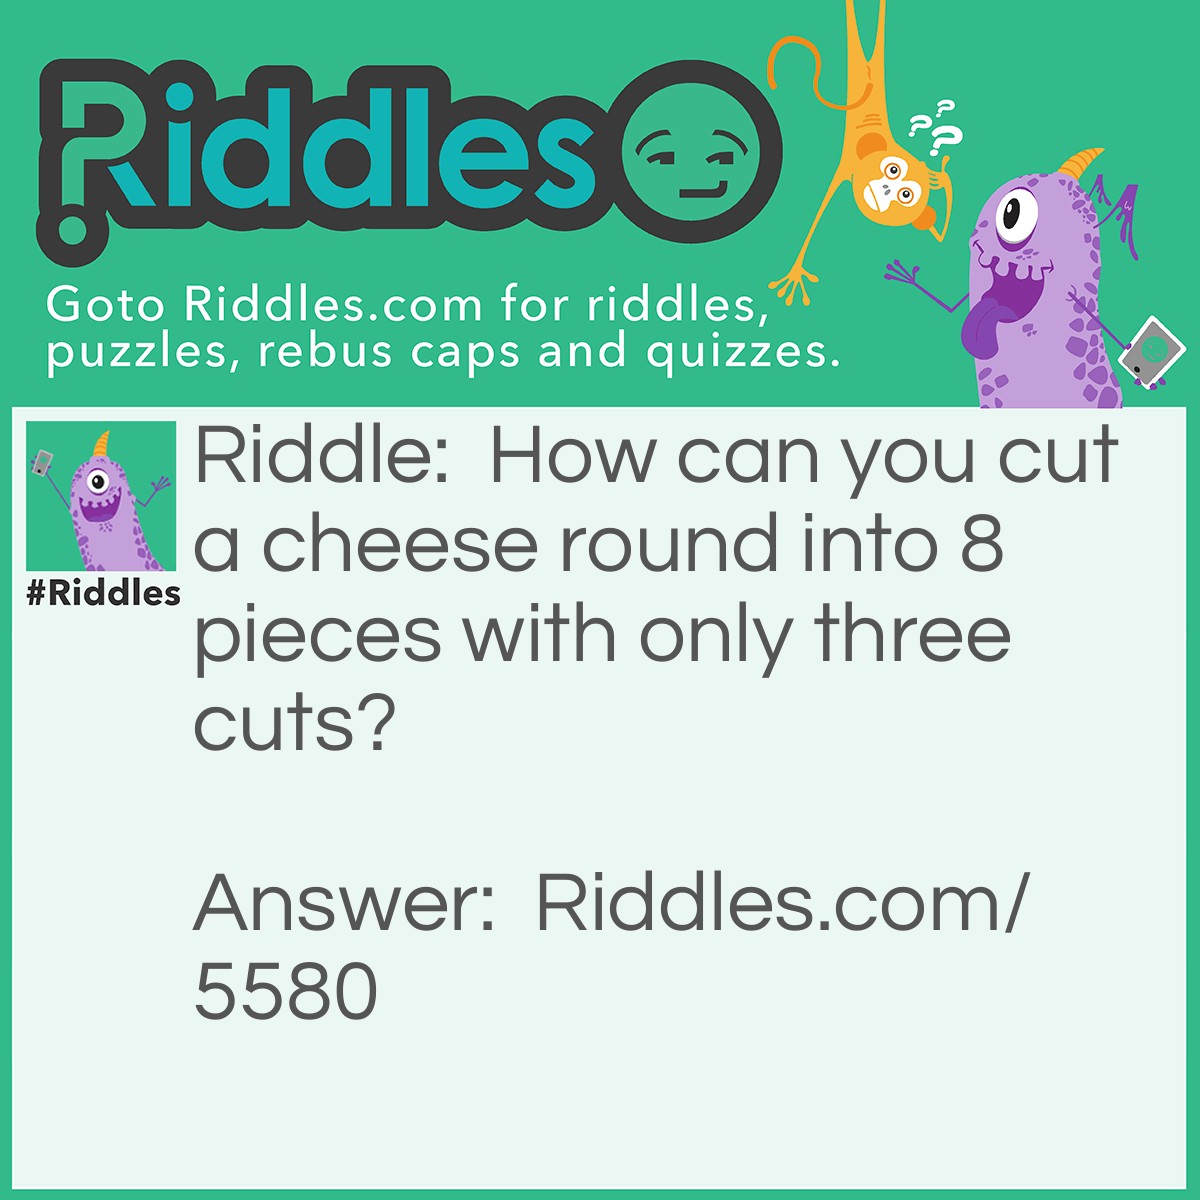 Riddle: How can you cut a cheese round into 8 pieces with only three cuts? Answer: First you cut the cylinder lengthwise. With the two pieces stacked end to end, you cut the cheese into quarters with two cuts.  The result is three cuts and 8 pieces of cheese. See the image below for three cuts needed to divide a cheese round into eight pieces.
<img src="../../../uploads/images/3-cut-cheese-riddle.jpg" alt="" />